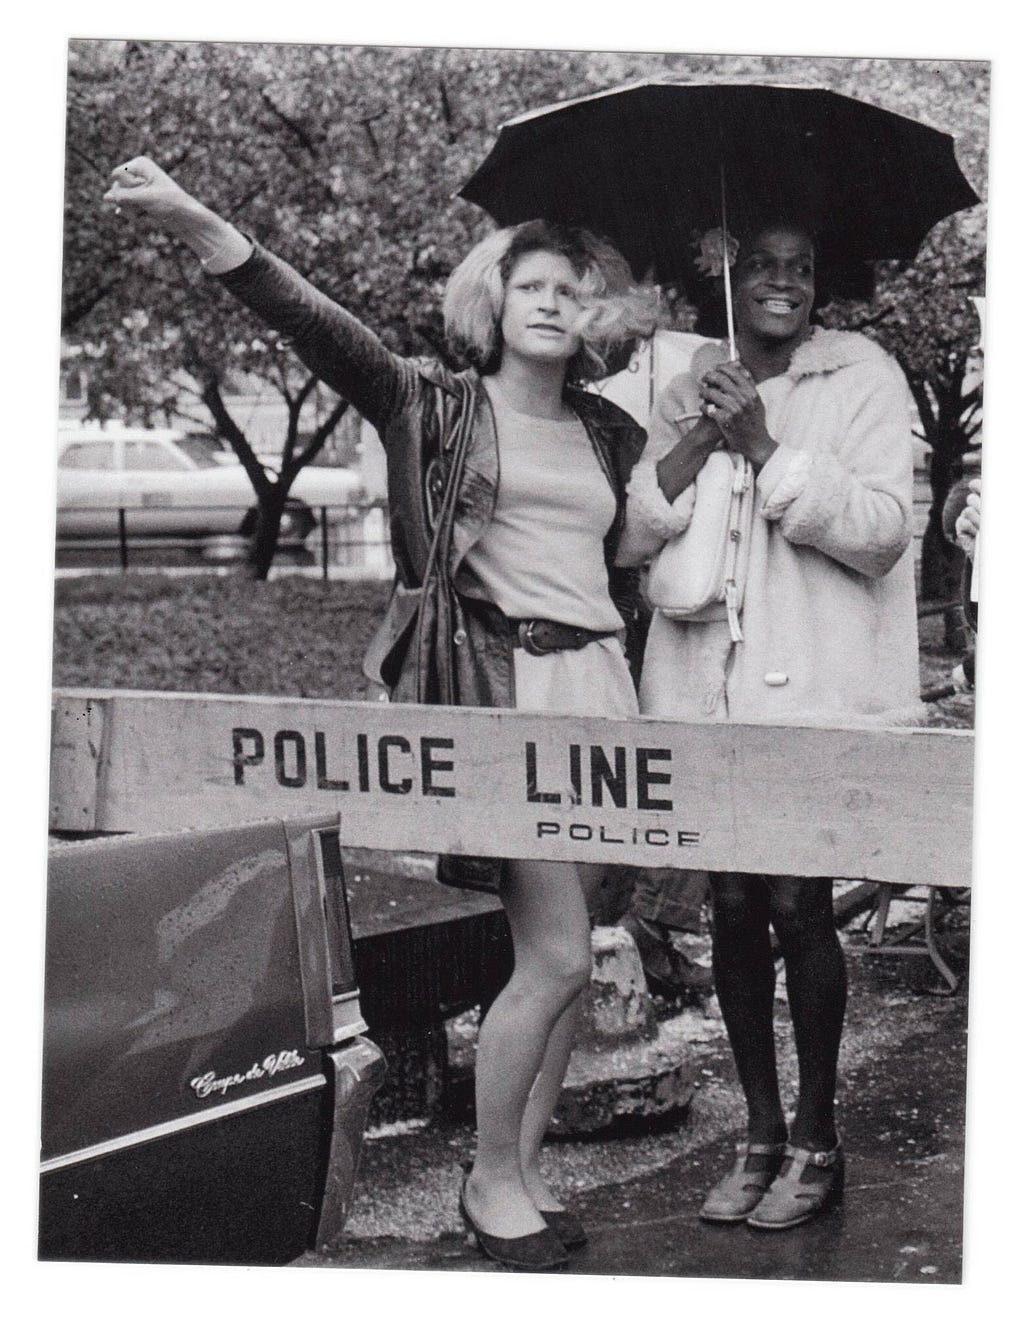 Trans activists Sylvia Rivera and Marsha P. Johnson stand together in front of a police barricade